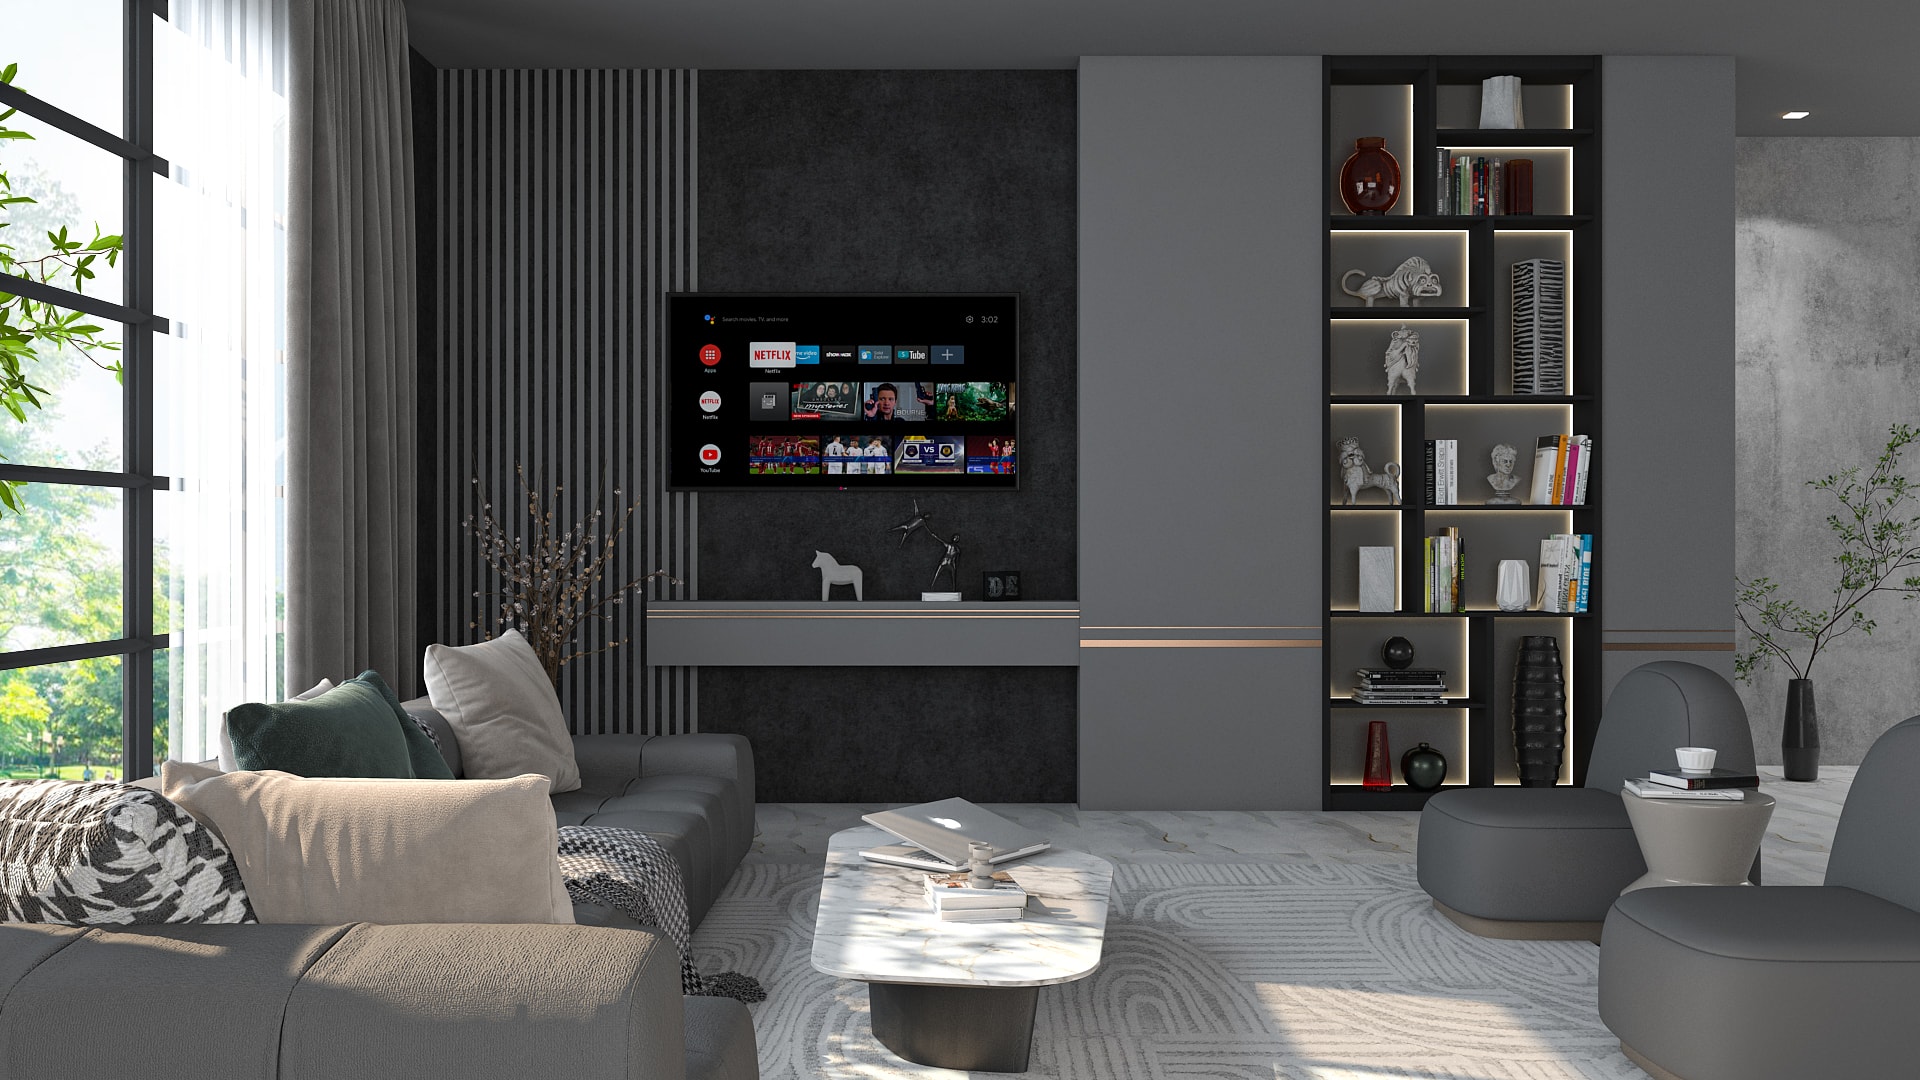 Monochrome Living Room With TV